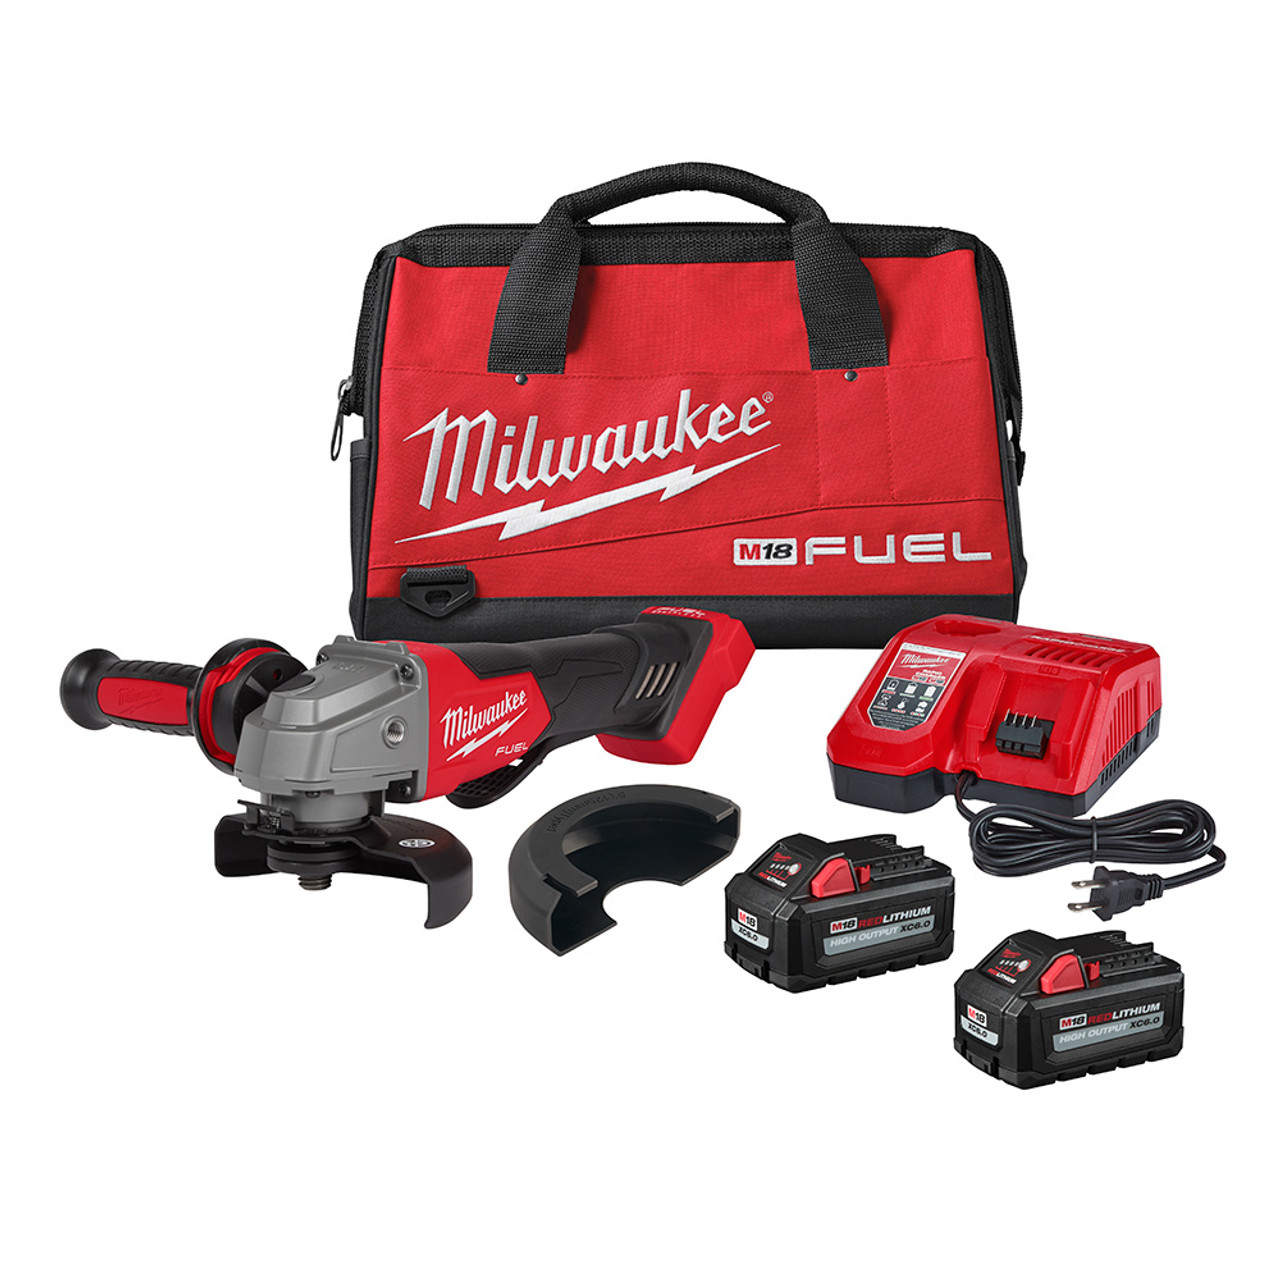 M18 FUEL 18 Volt Lithium-Ion Brushless Cordless 4-1/2 in. in. Grinder  Paddle Switch, No-Lock Kit